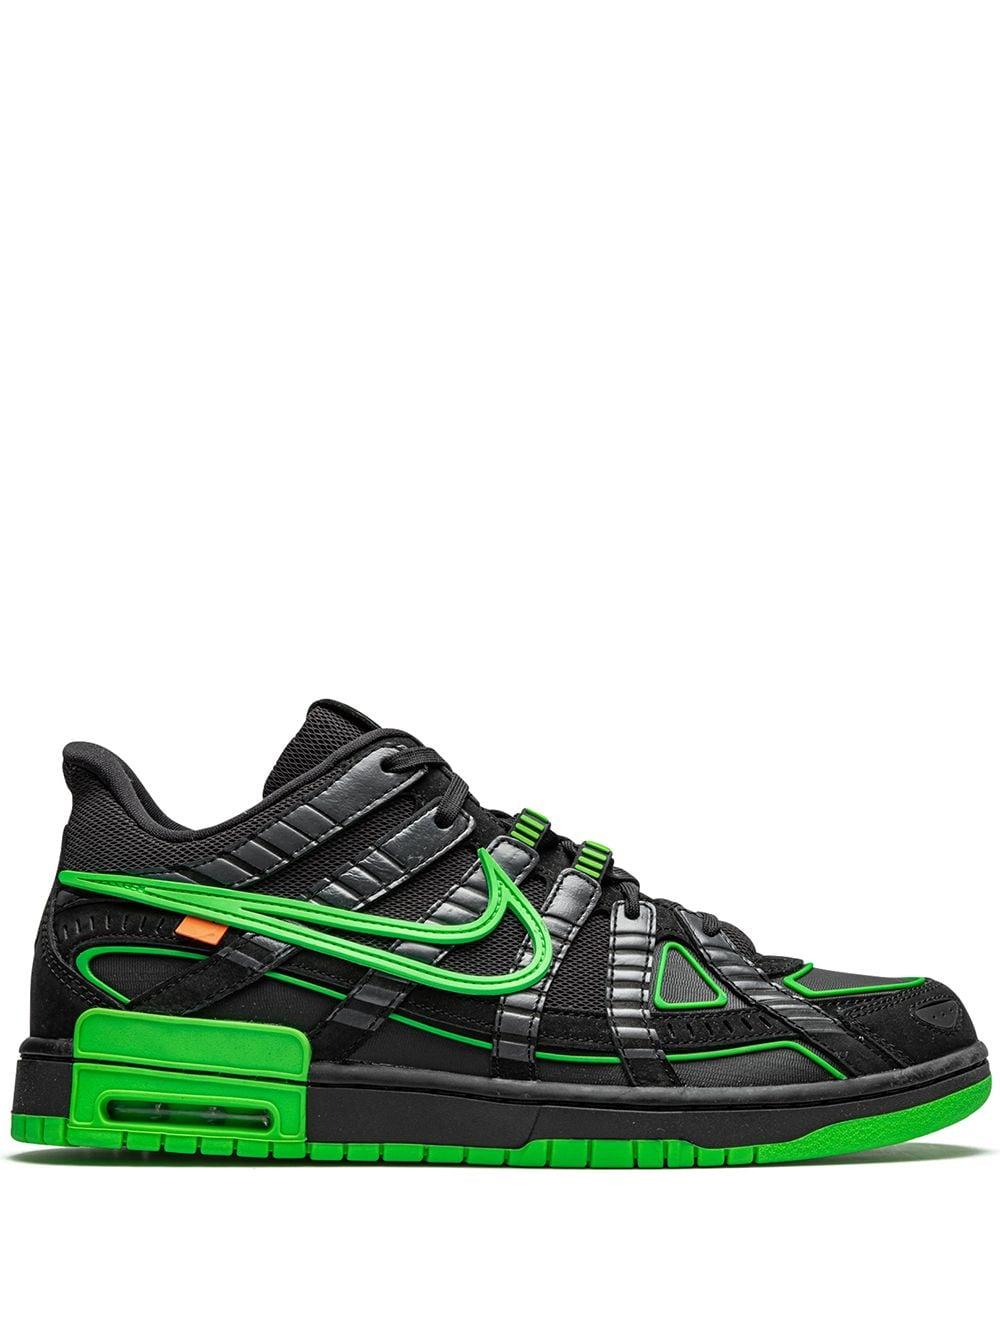 NIKE X OFF-WHITE Air Rubber Dunk "green Strike" Sneakers | Lyst